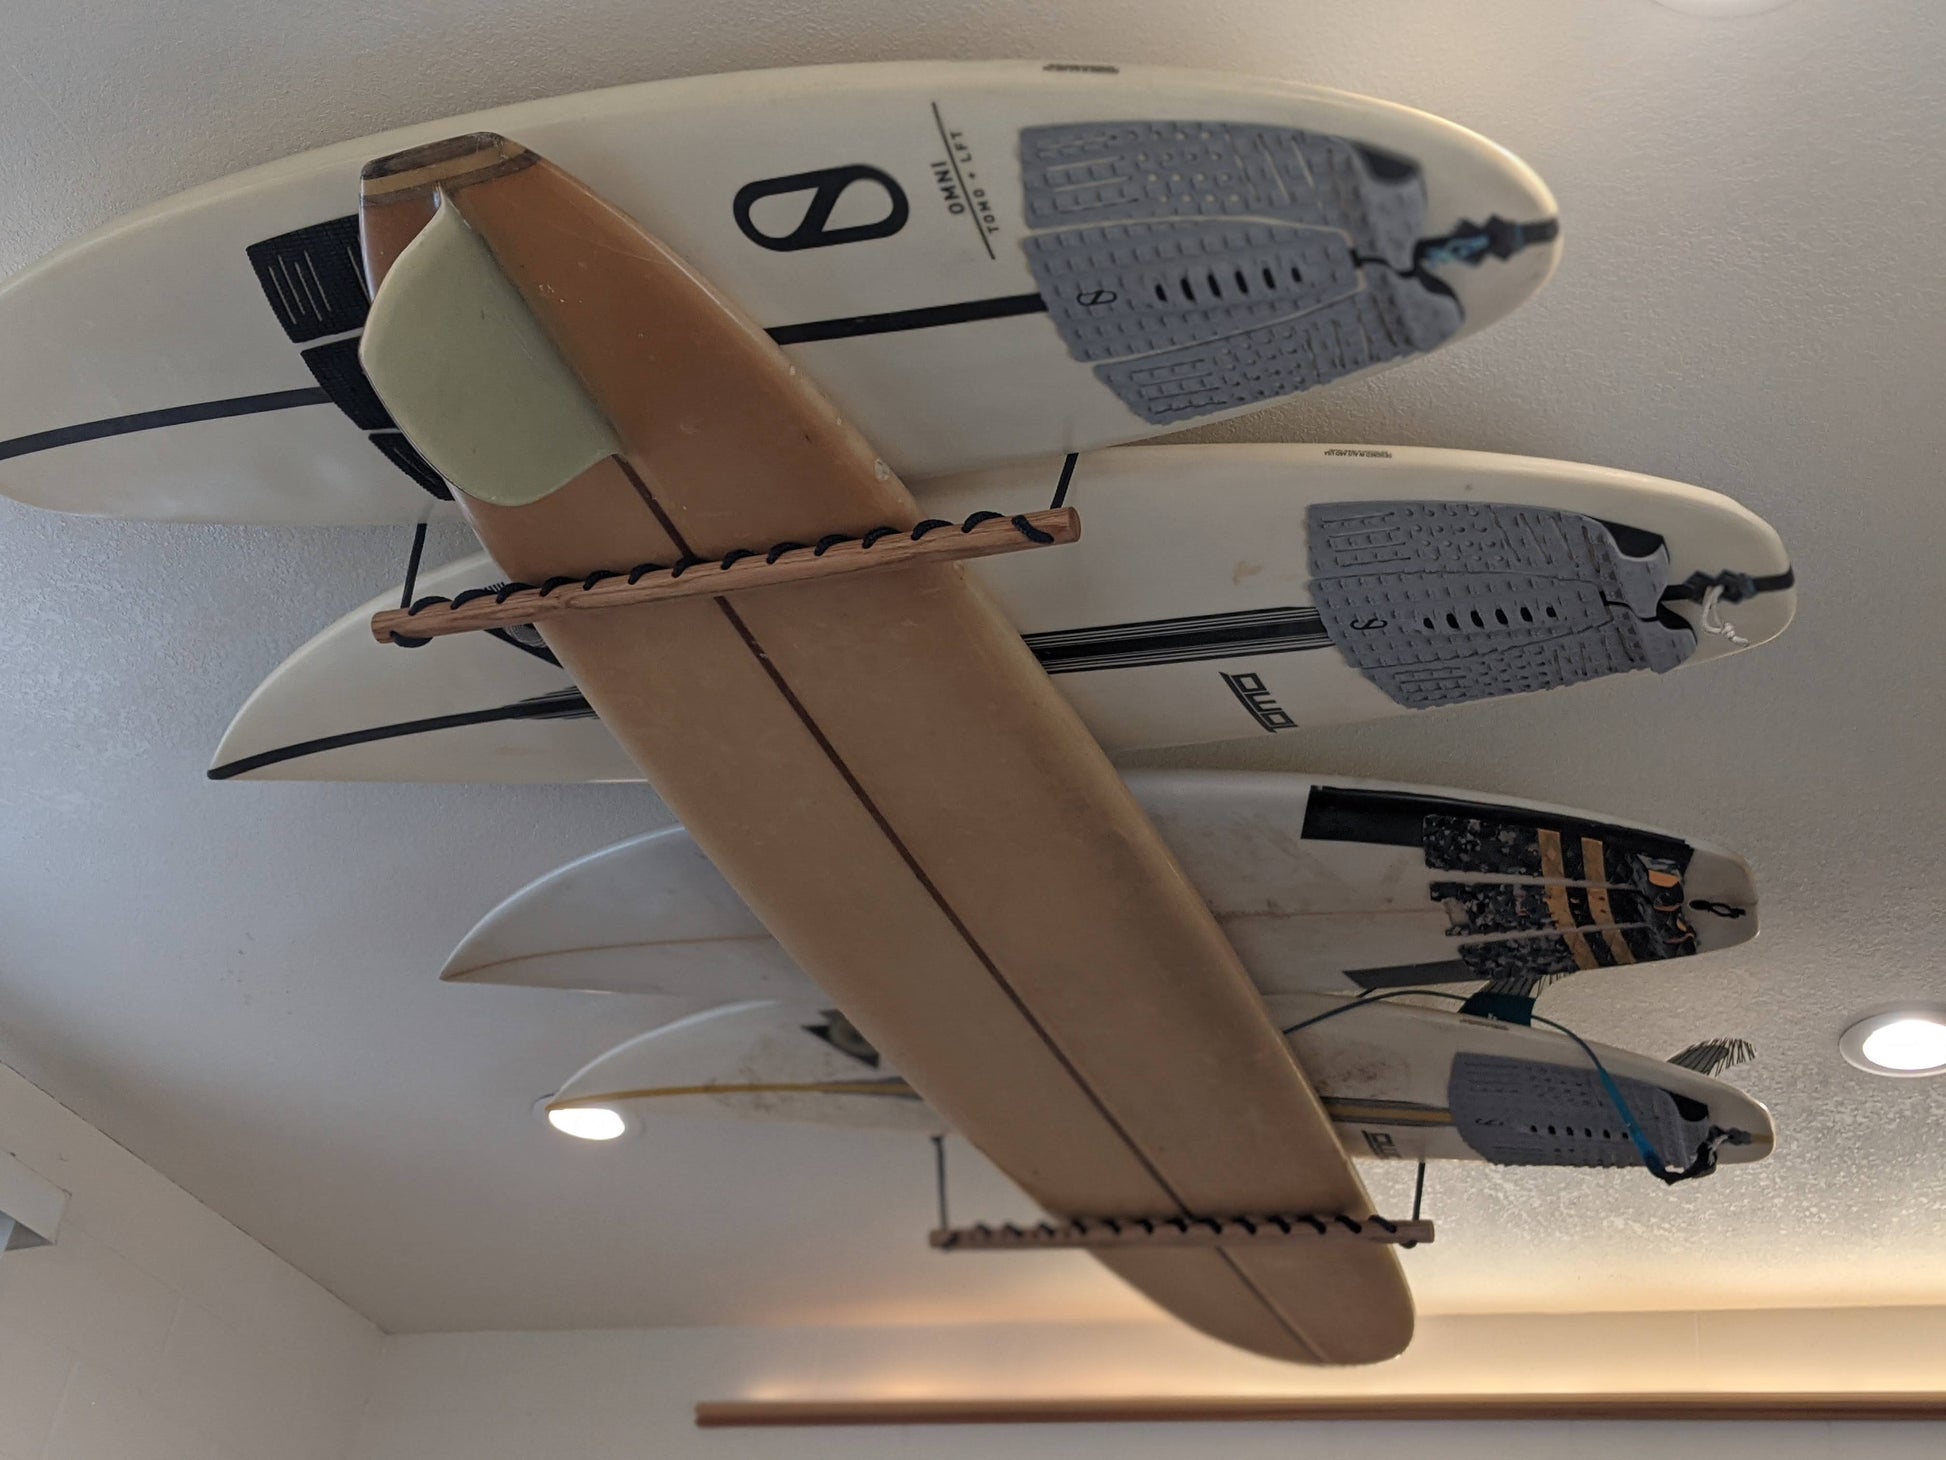 How To Hang Surfboard From The Ceiling